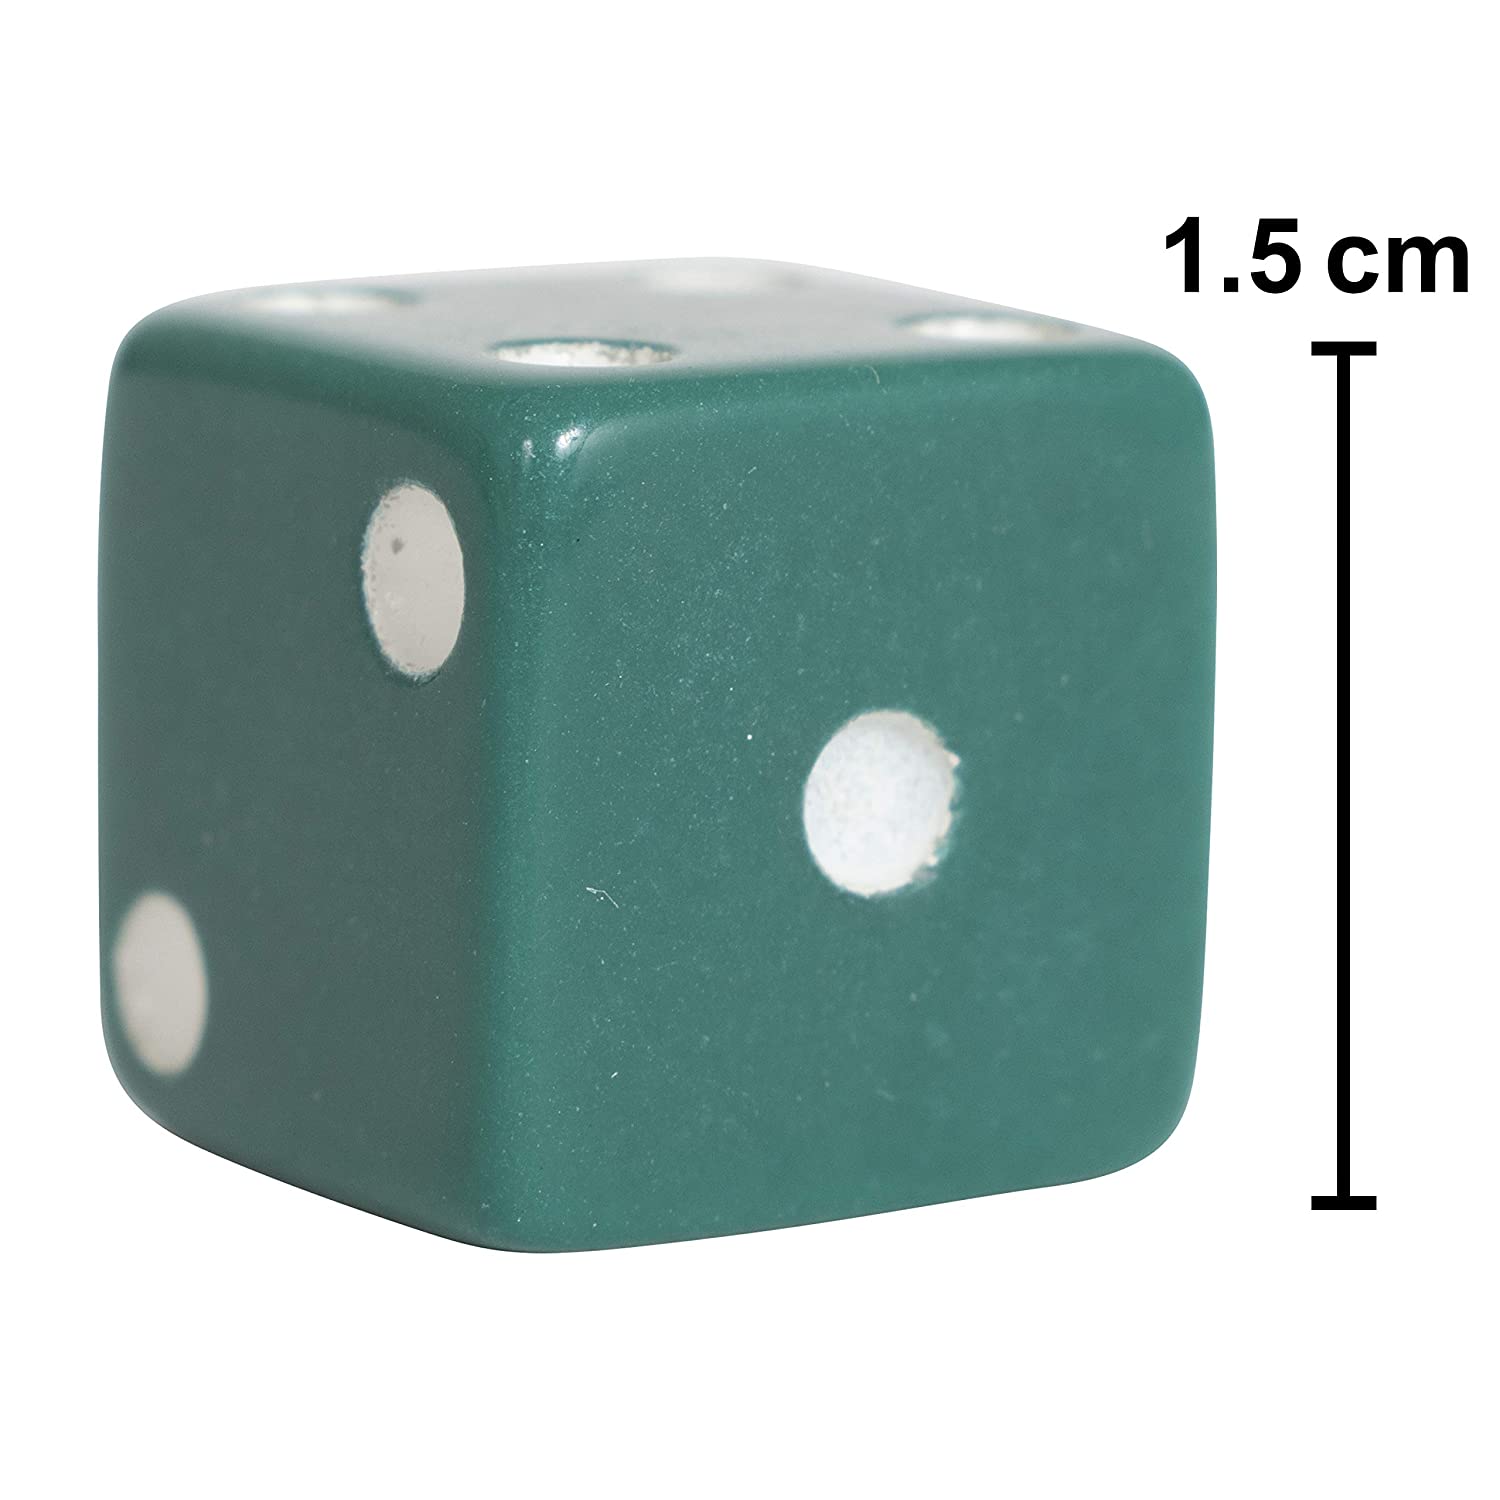 LEARNING ADVANTAGE Red, White and Green Dot Dice - Set of 36, Multi (7366)